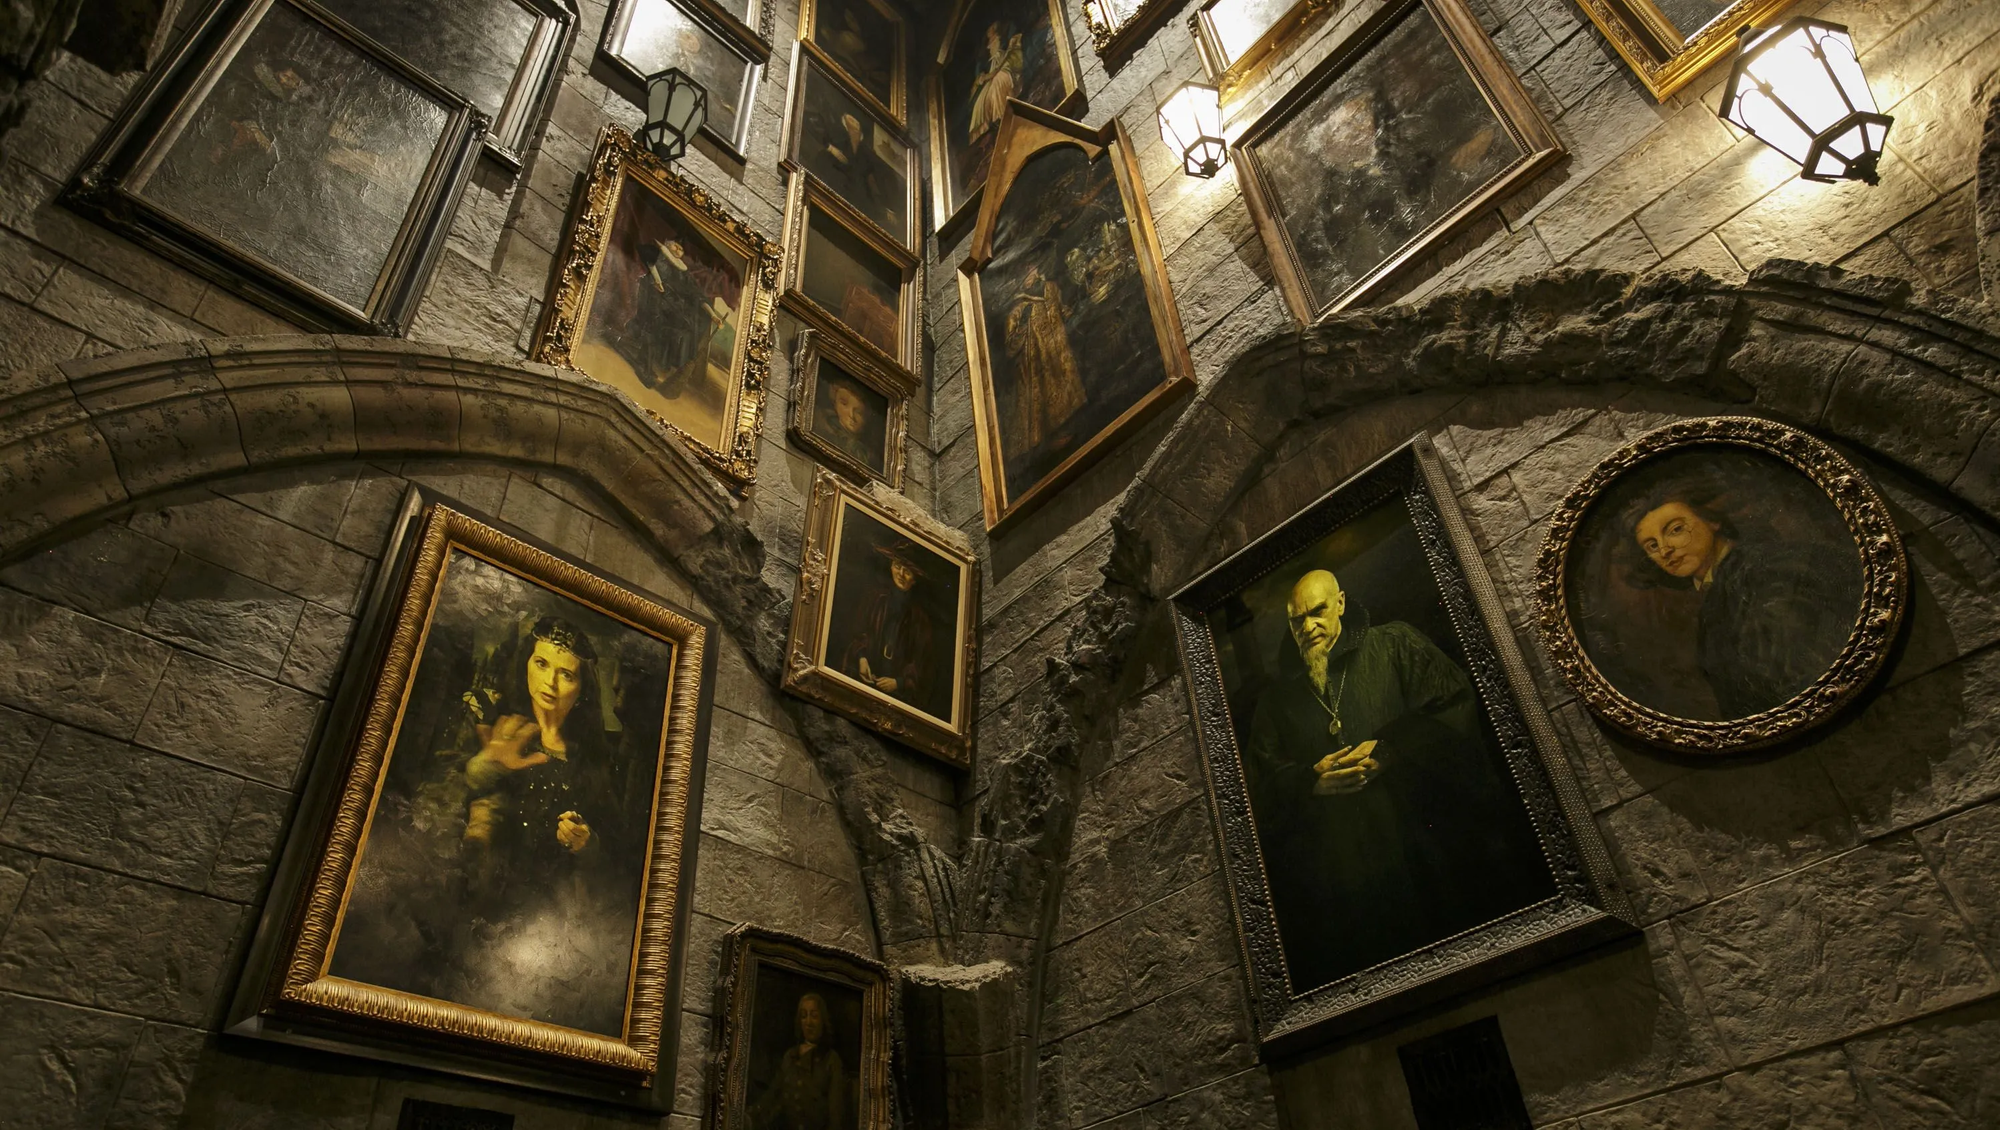 A sample of portraits in Hogwarts. This static image belies that they each are moving within the frame.